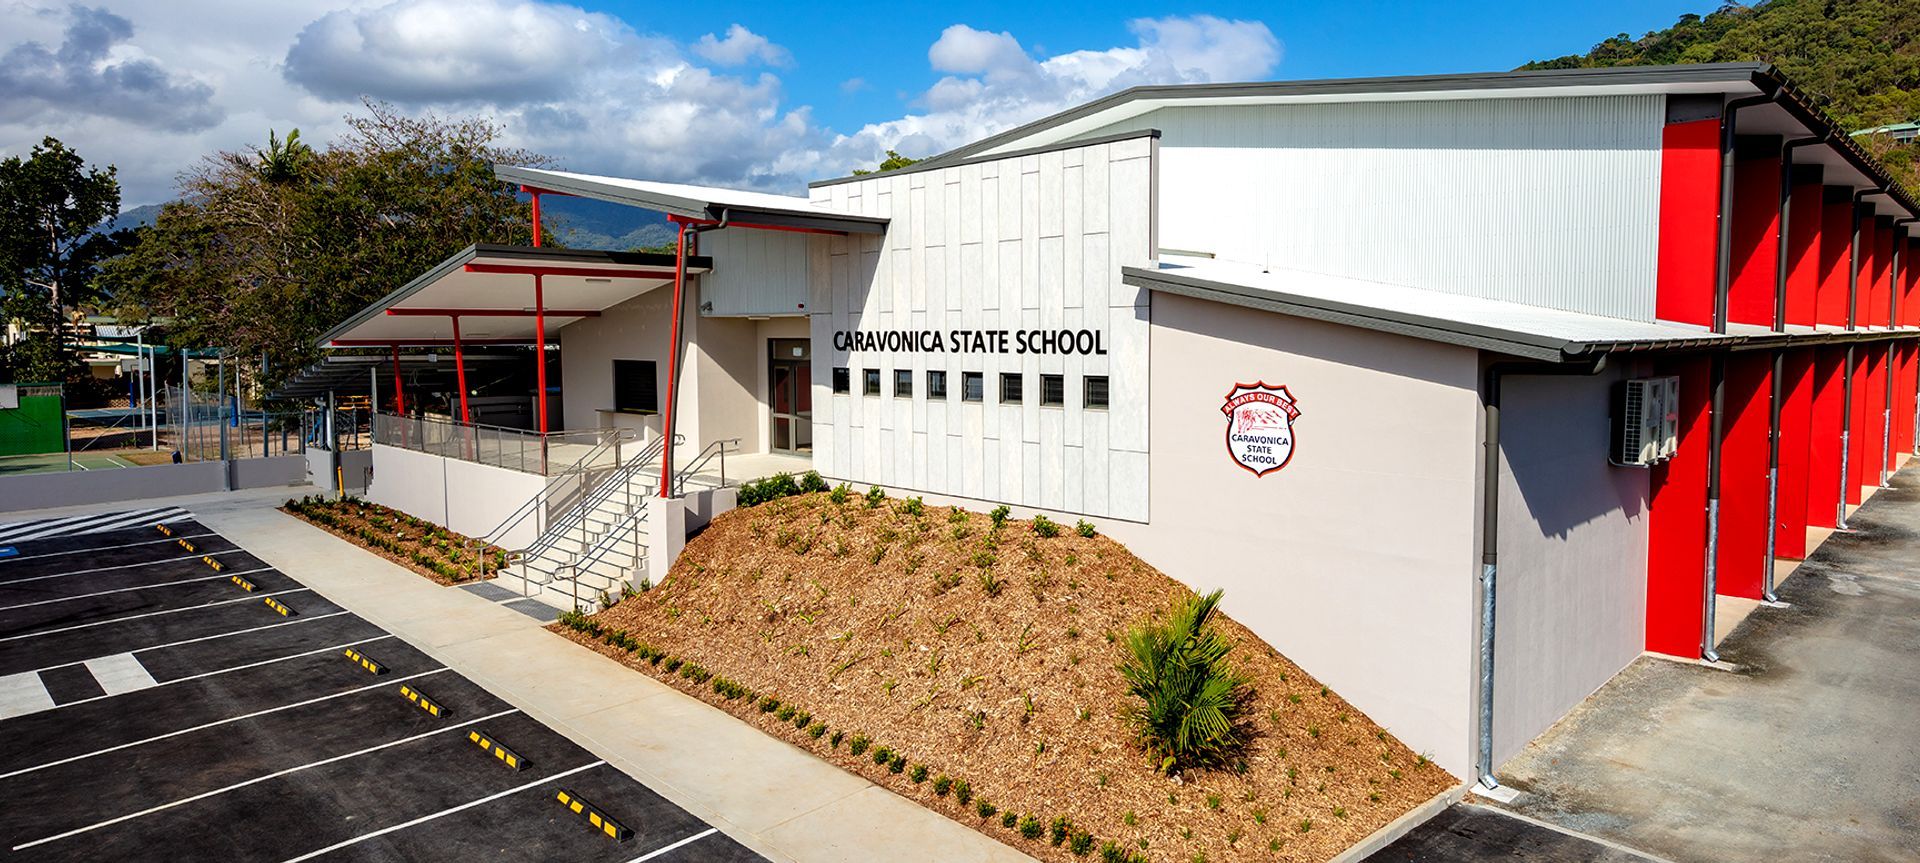 Caravonica State School Sports Hall banner